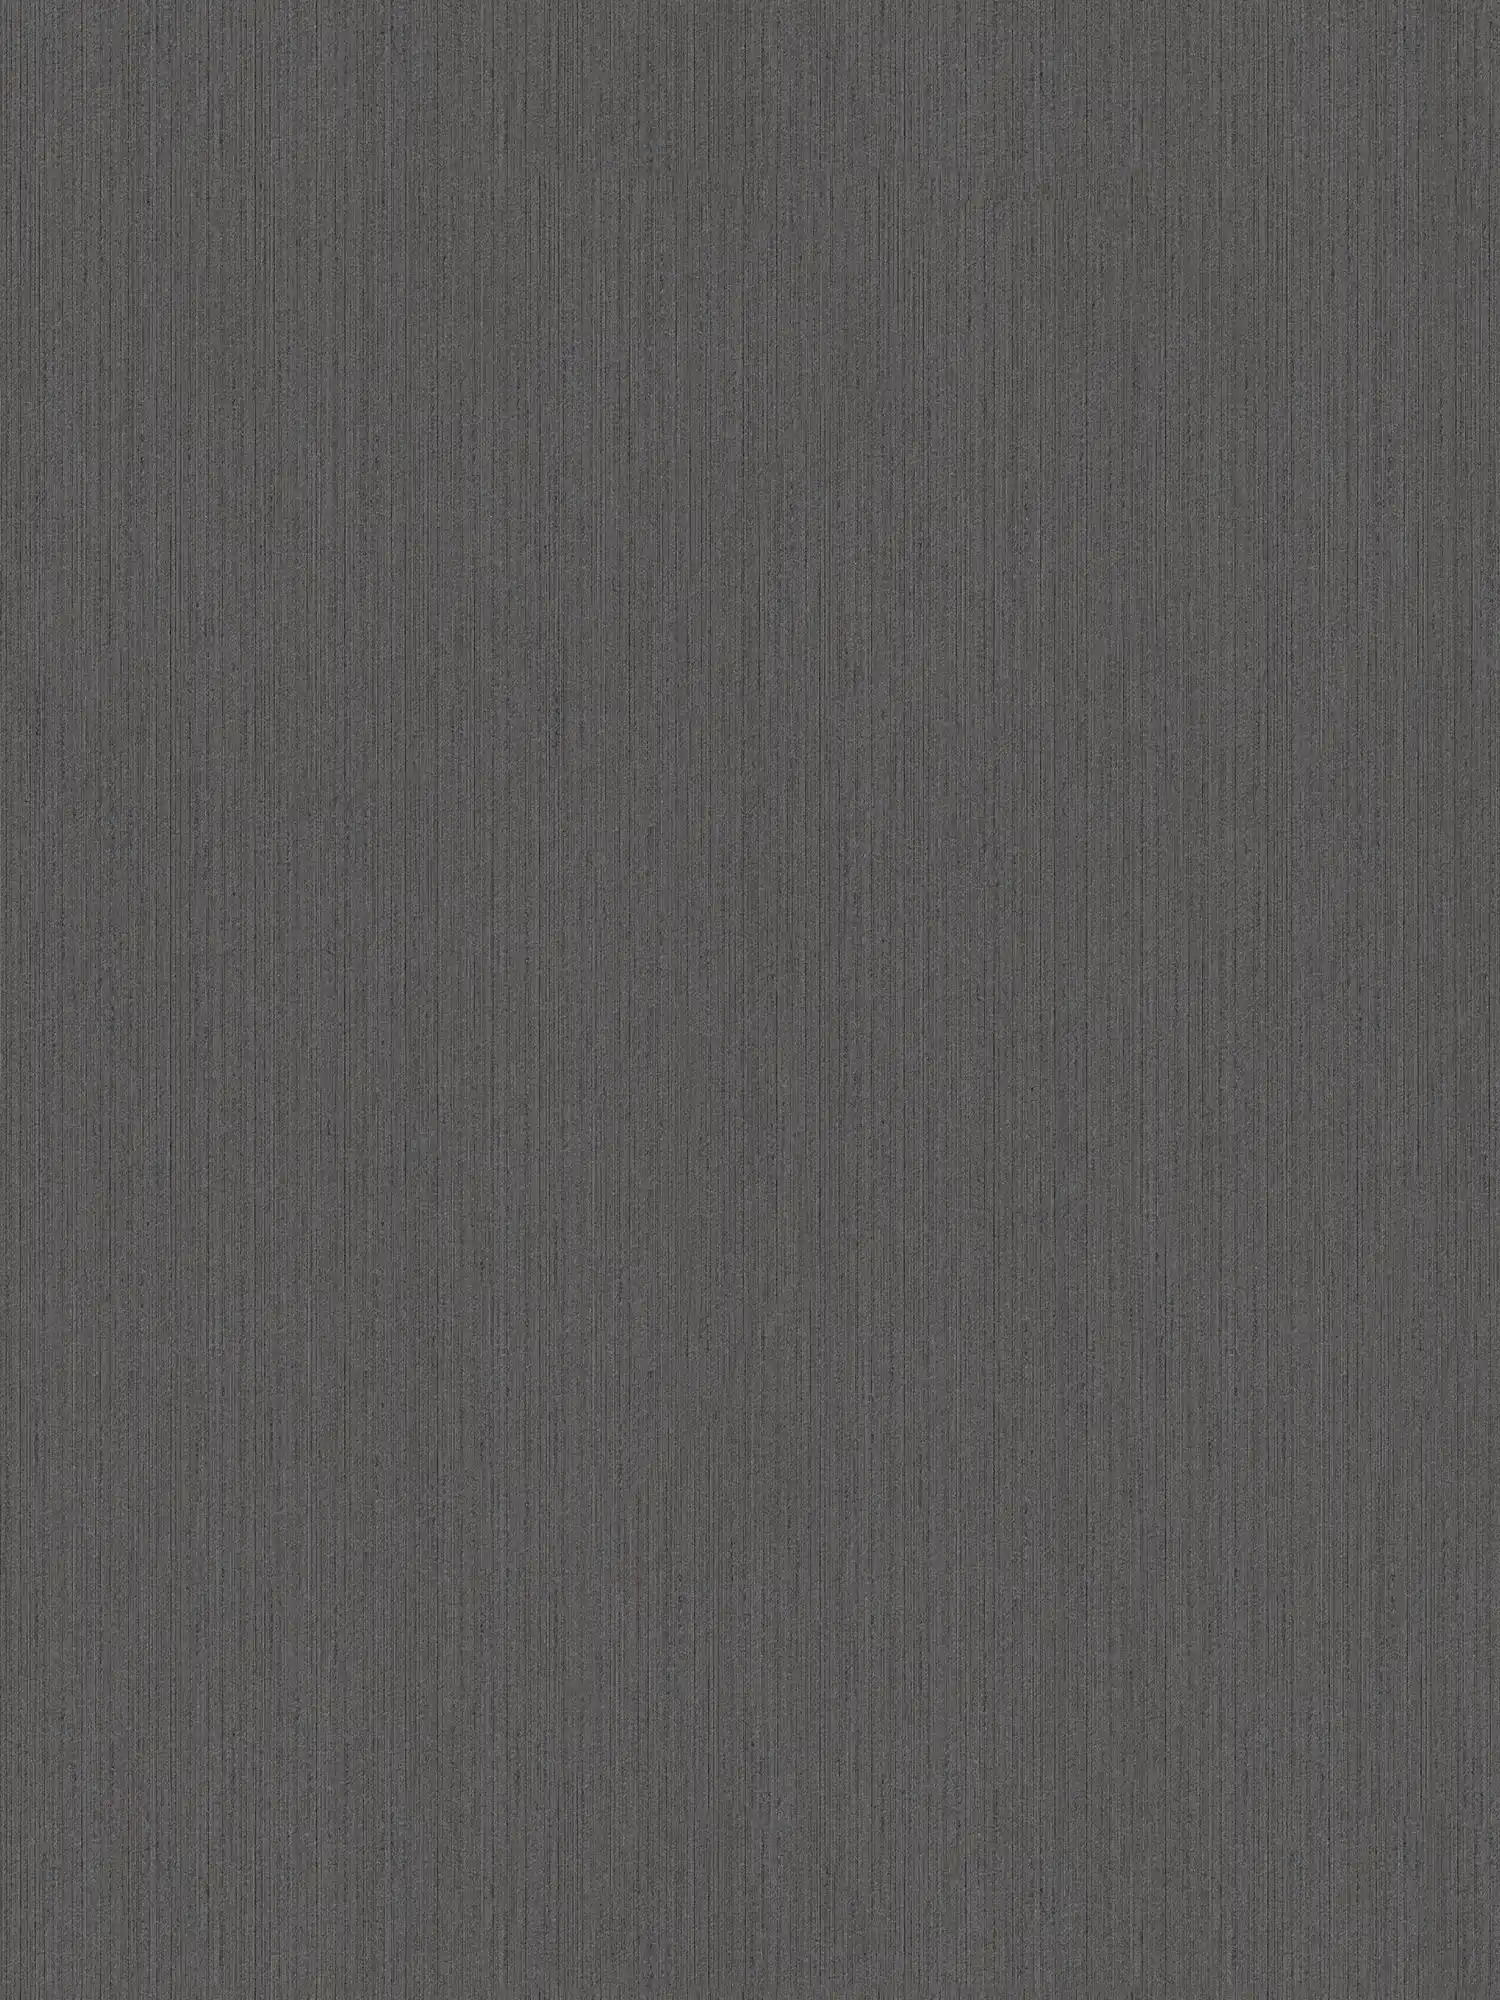 Wallpaper graphite grey with texture effect & satin finish
